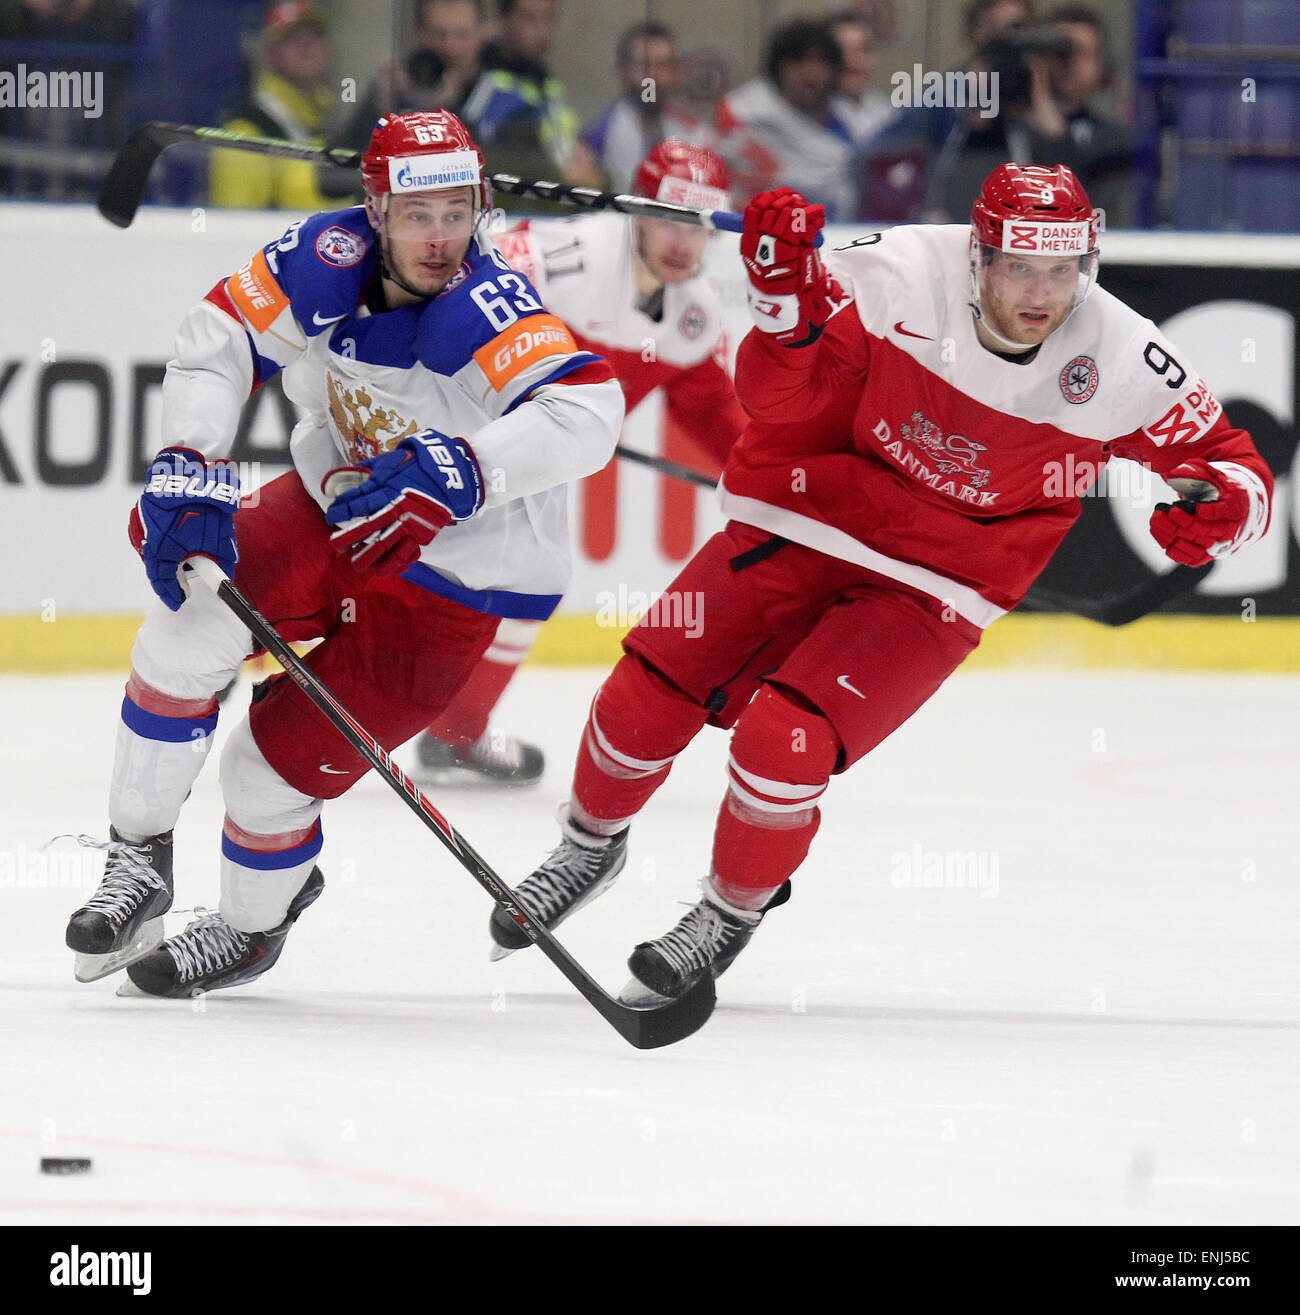 From left: Yevgeni Dadonov (RUS) and Frederik Storm (DNK) fight for a puck during the Ice Hockey World Championship Group B match Russia vs Denmark in Ostrava, Czech Republic, May 6, 2015. (CTK Photo/Petr Sznapka) Stock Photo